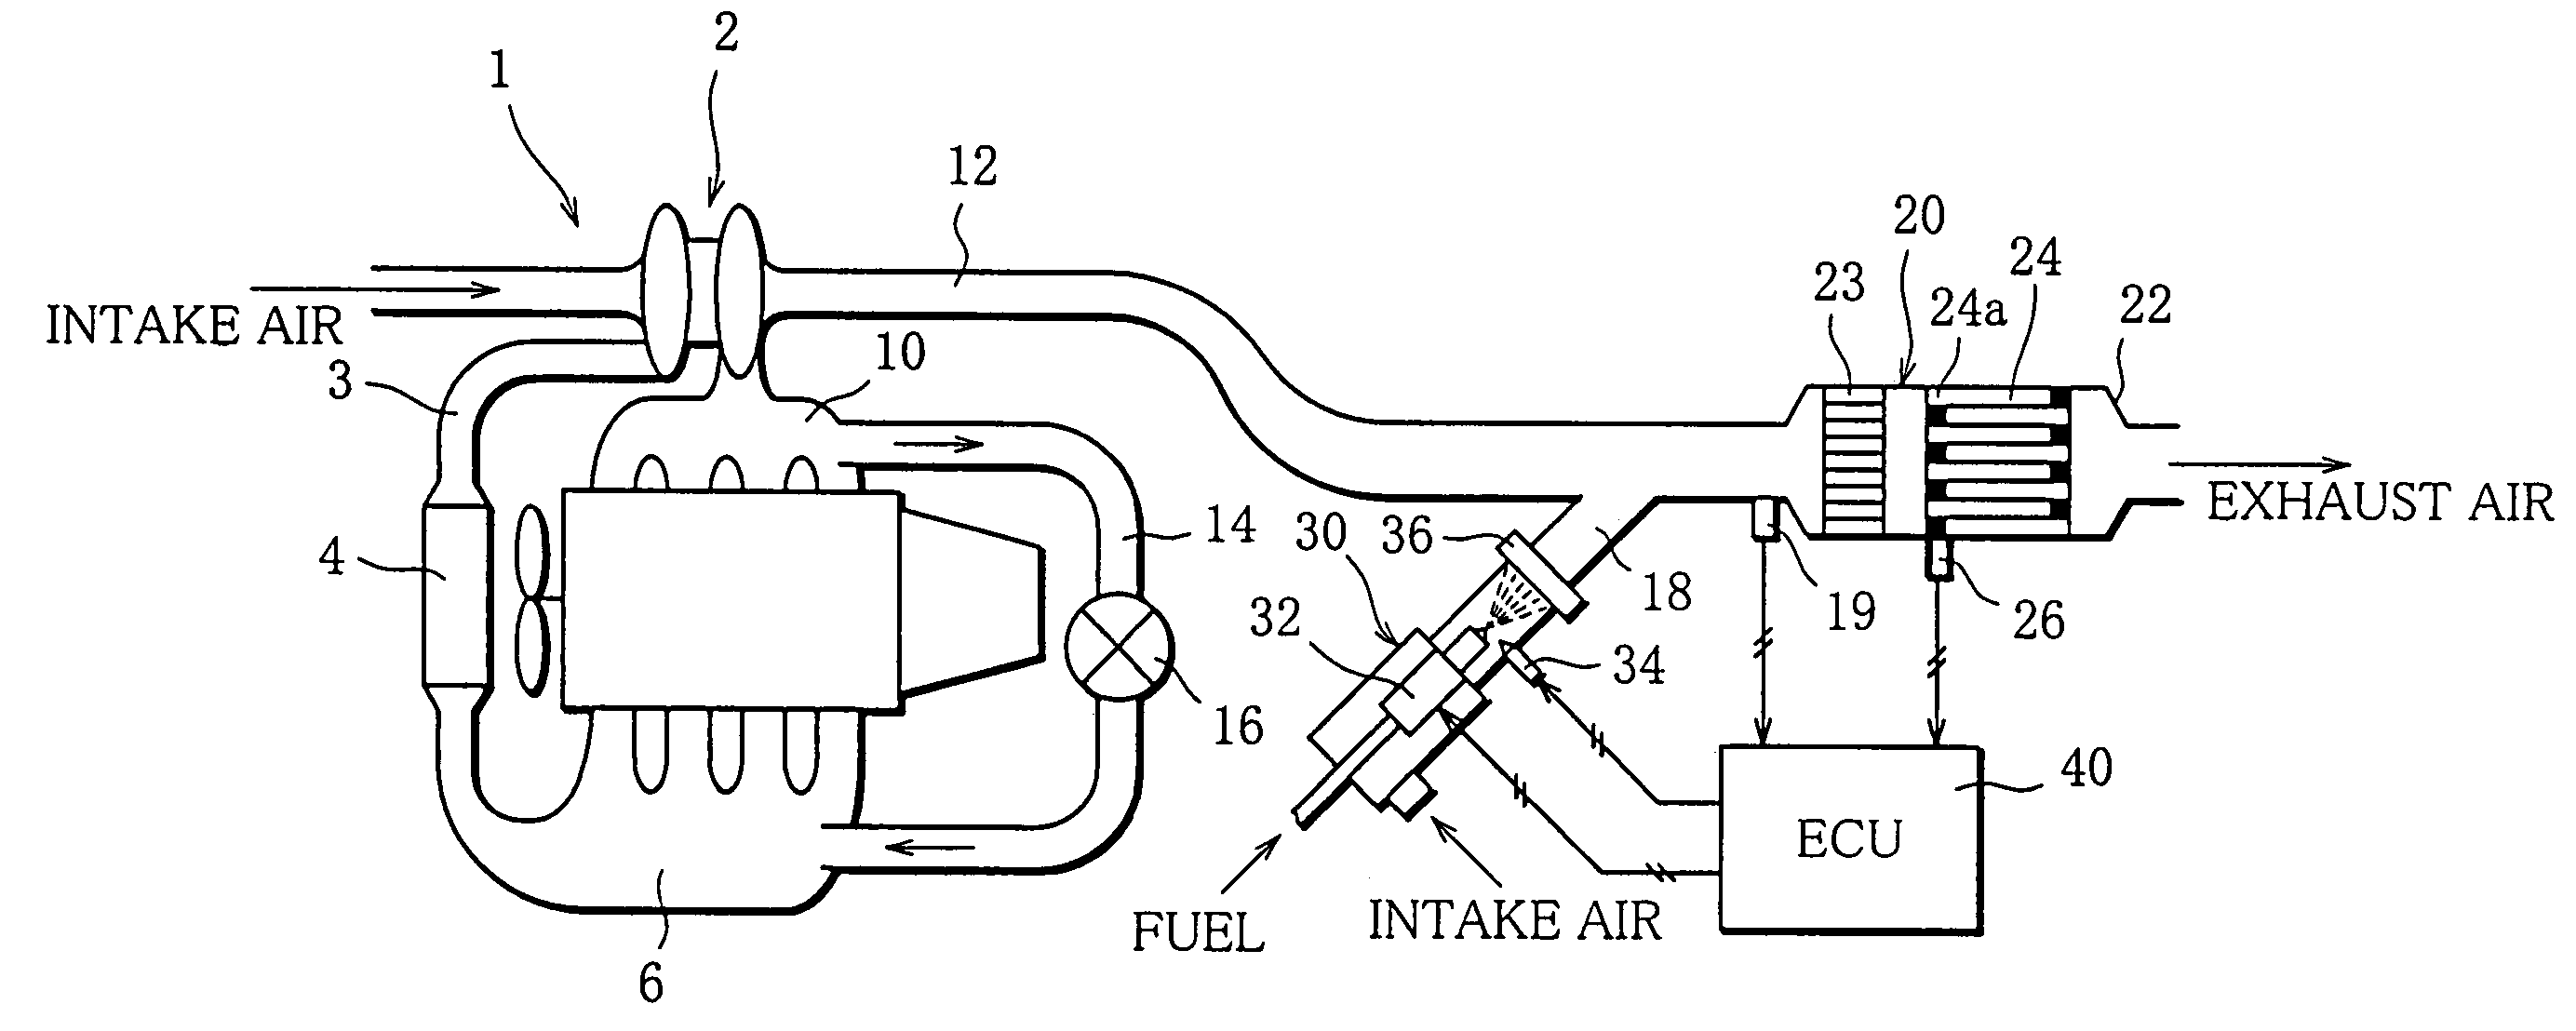 Exhaust emission control device for an internal combustion engine